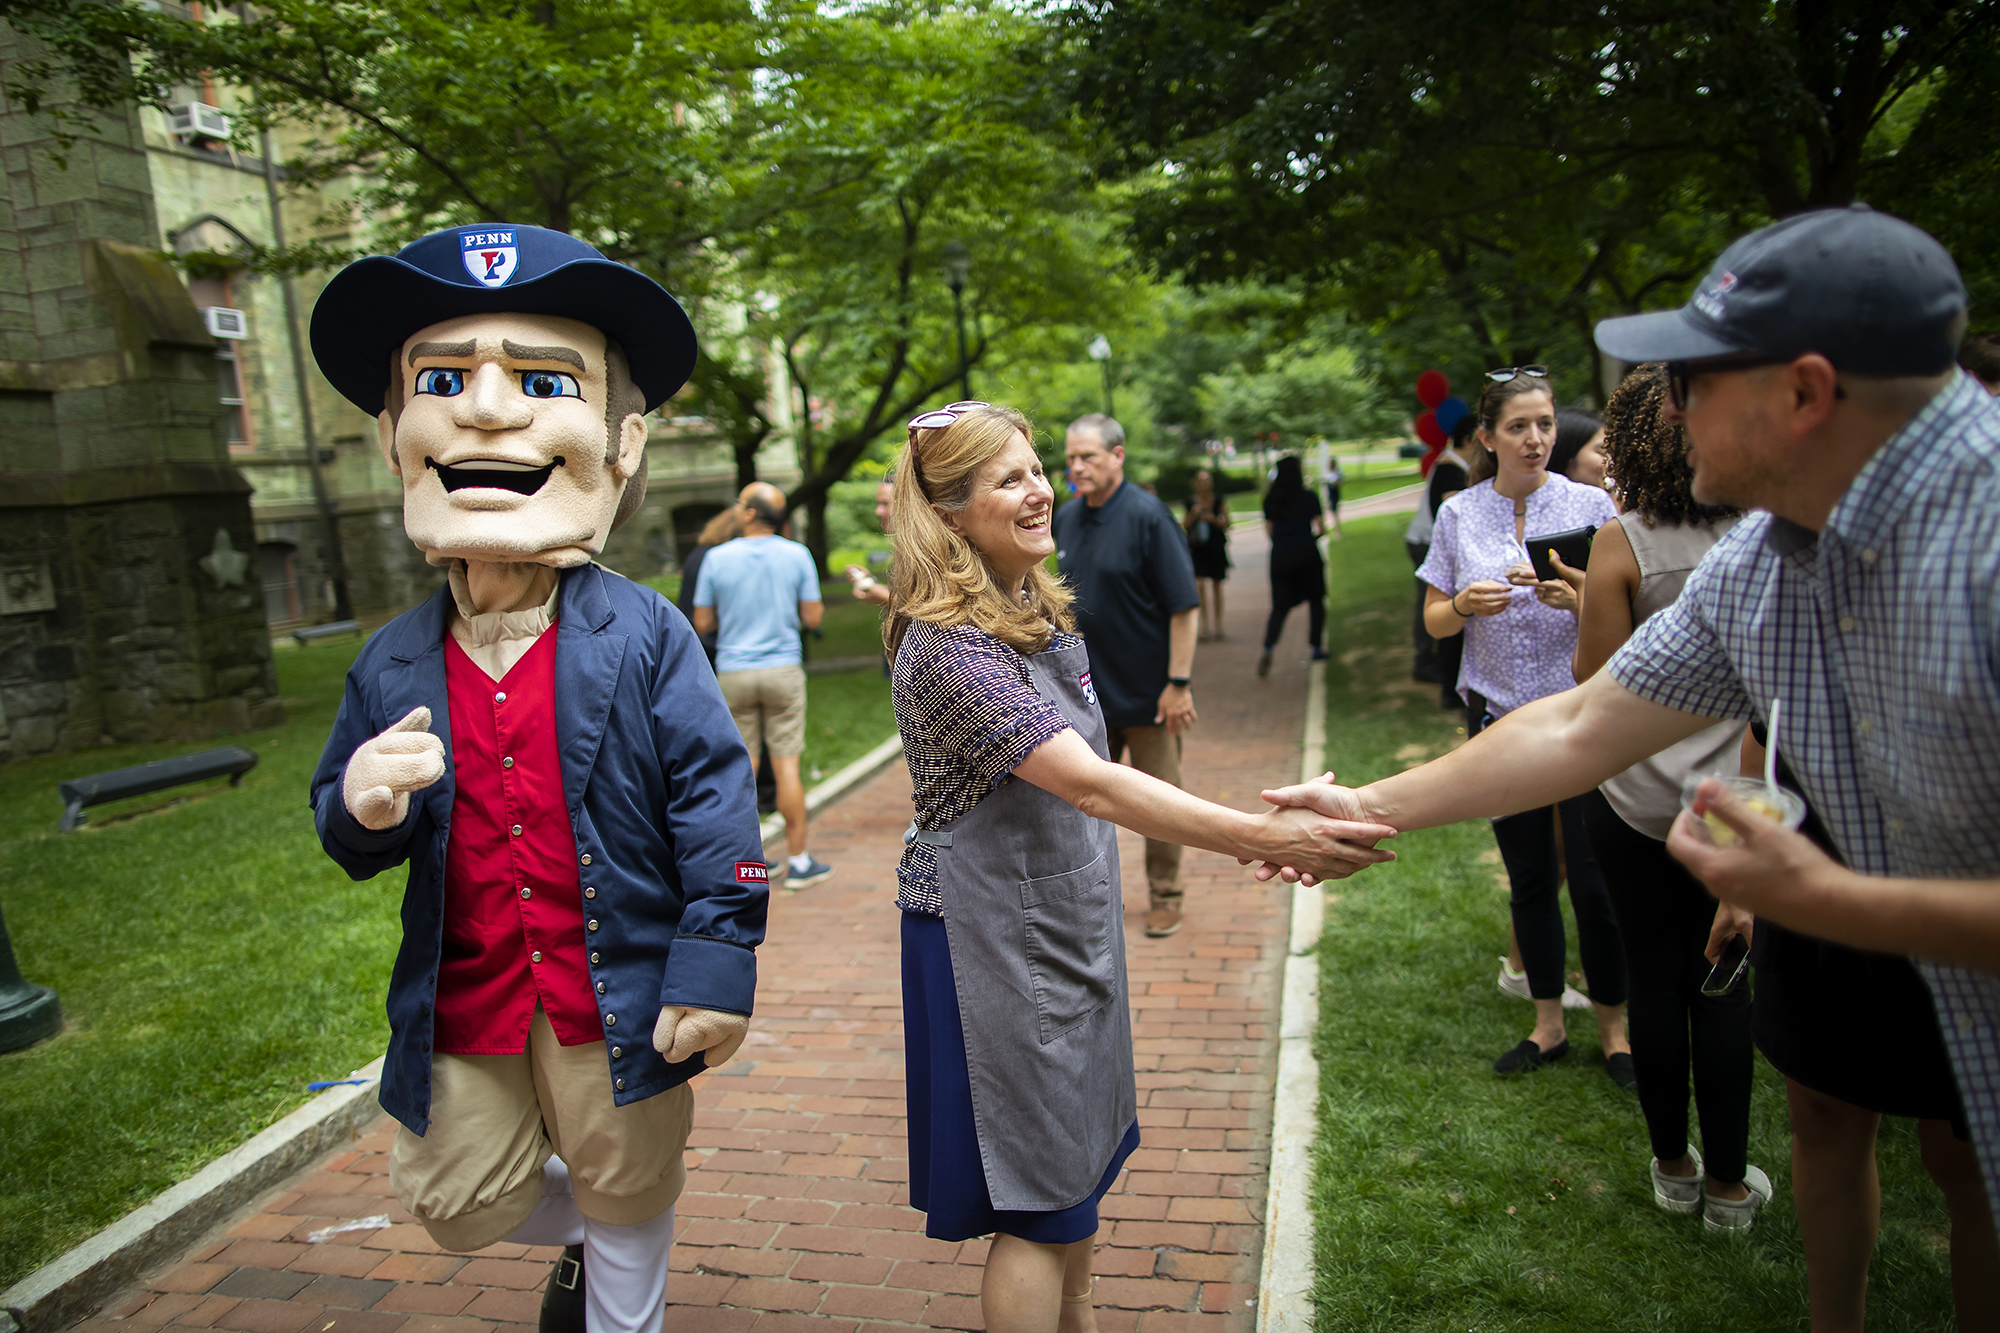 Penn President shakes hands with someone on College Green beside the Penn Quaker mascot.